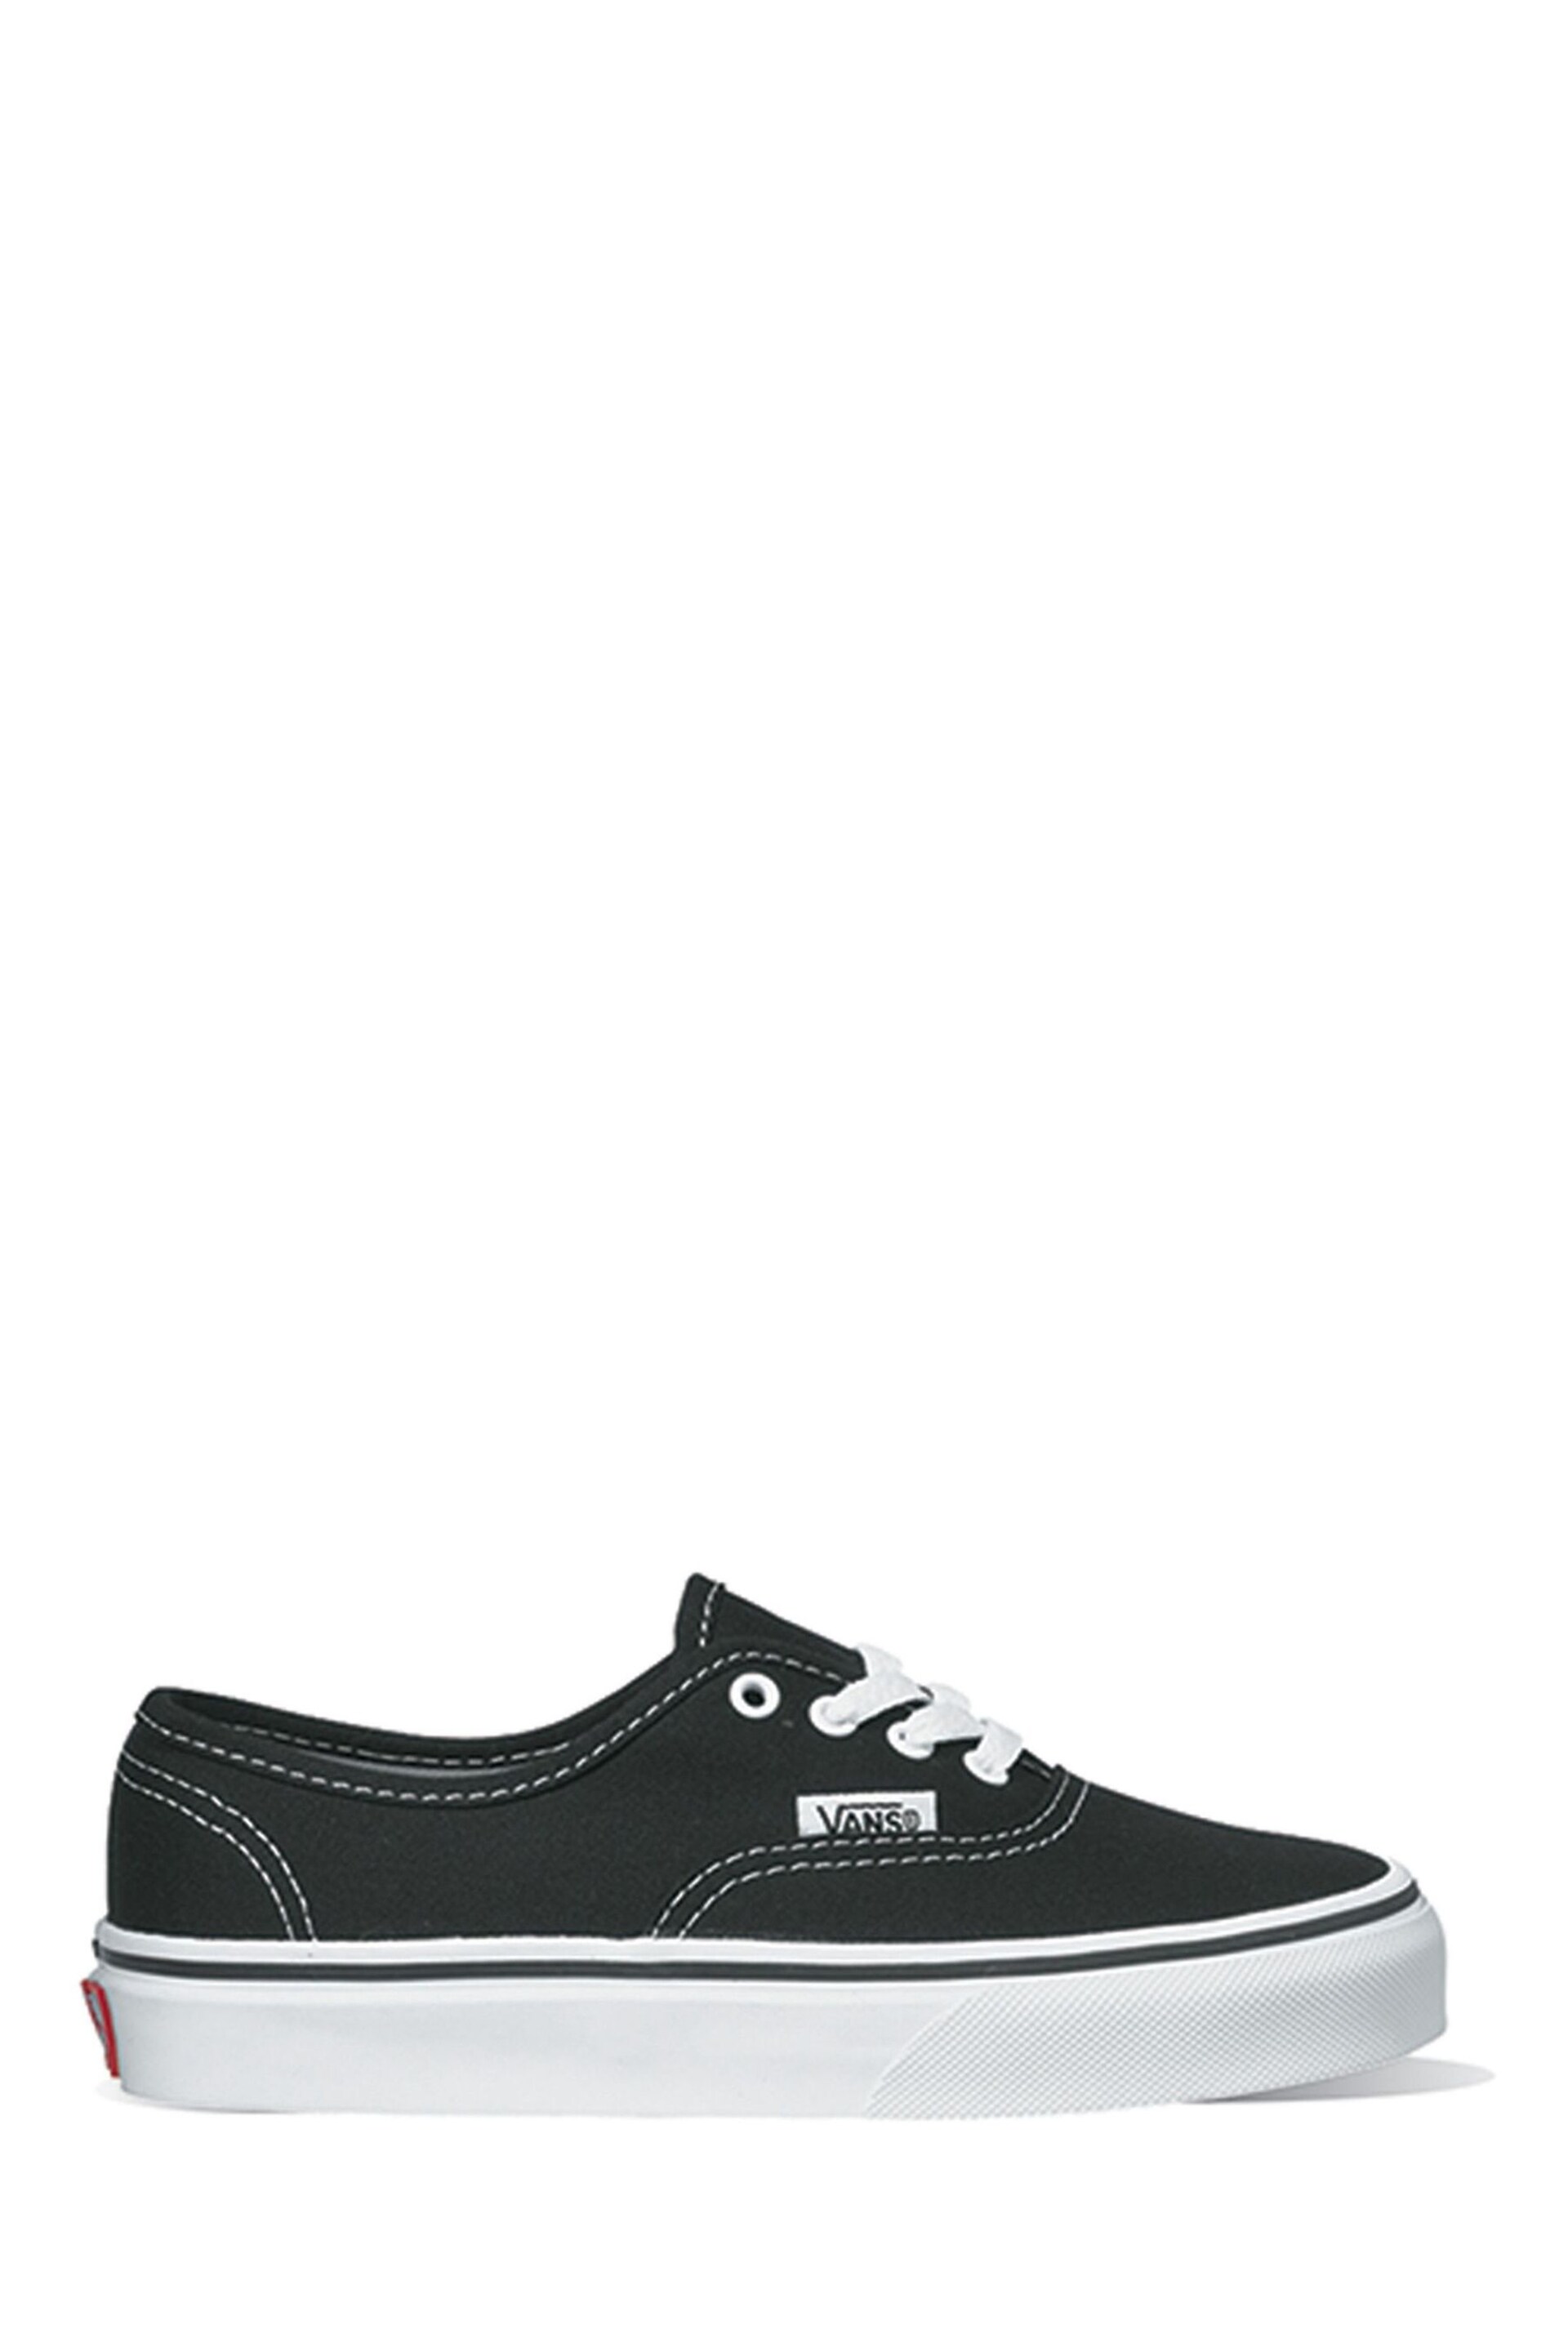 Vans Boys Authentic Trainers - Image 1 of 7